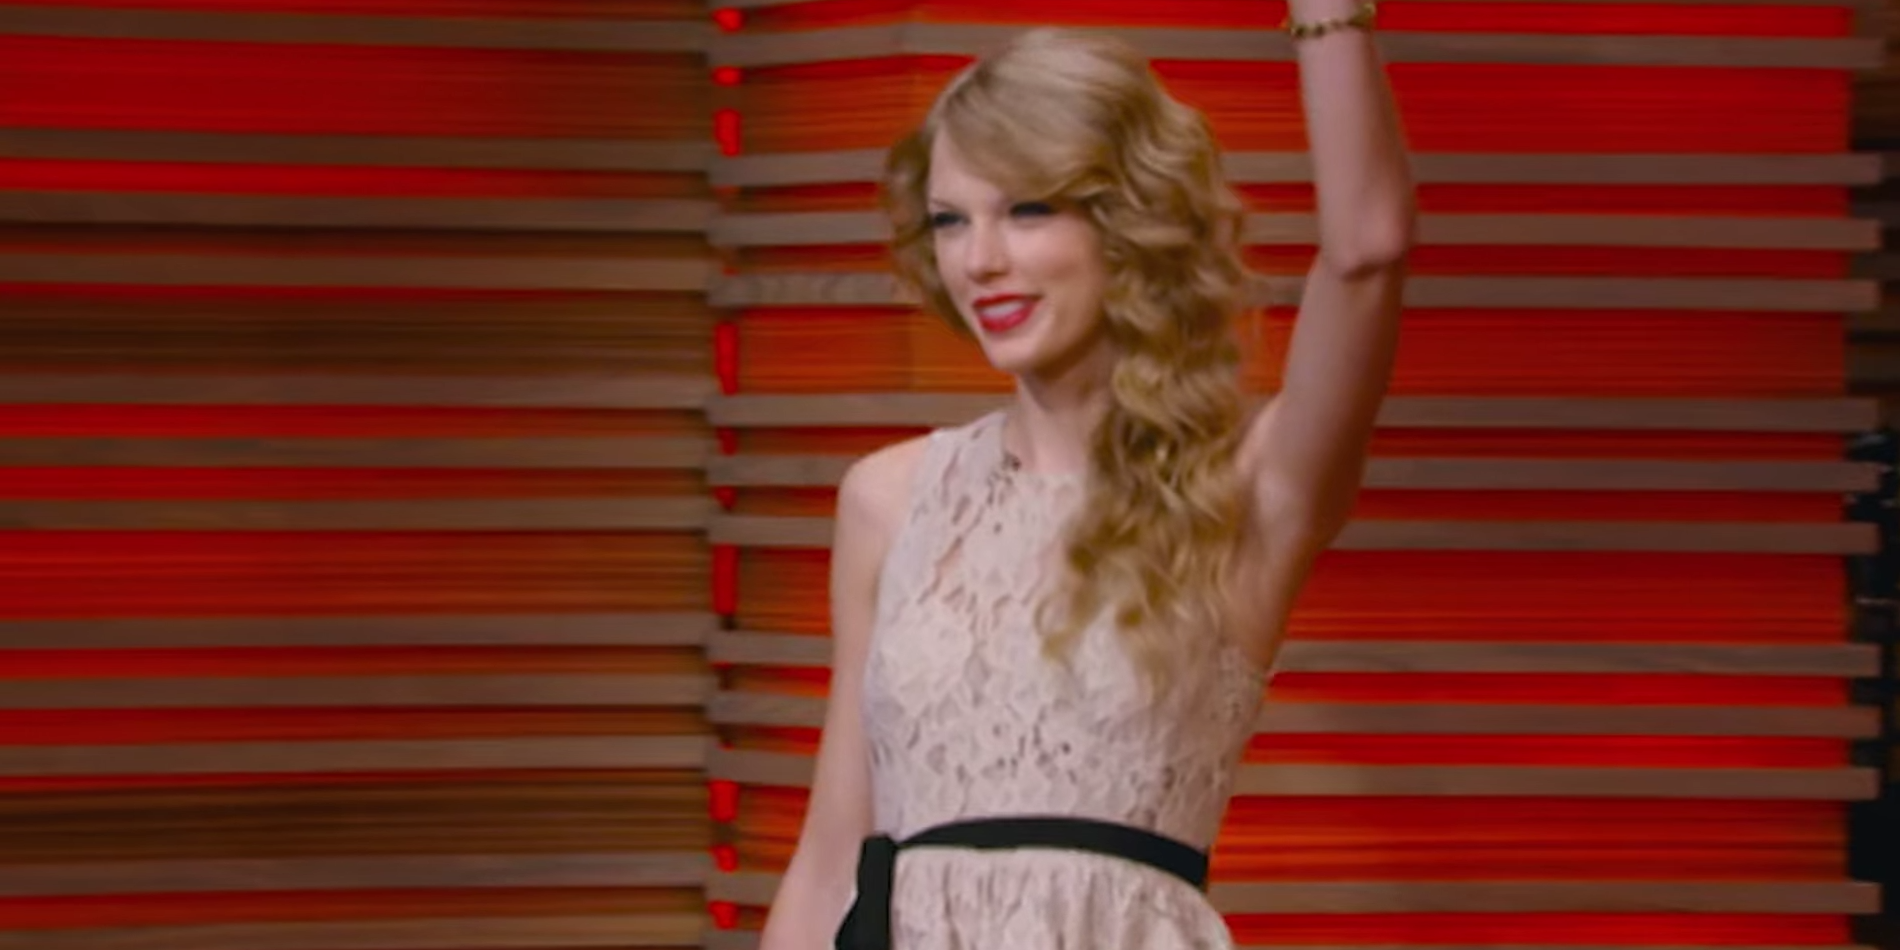 Taylor Swift smiling and waving